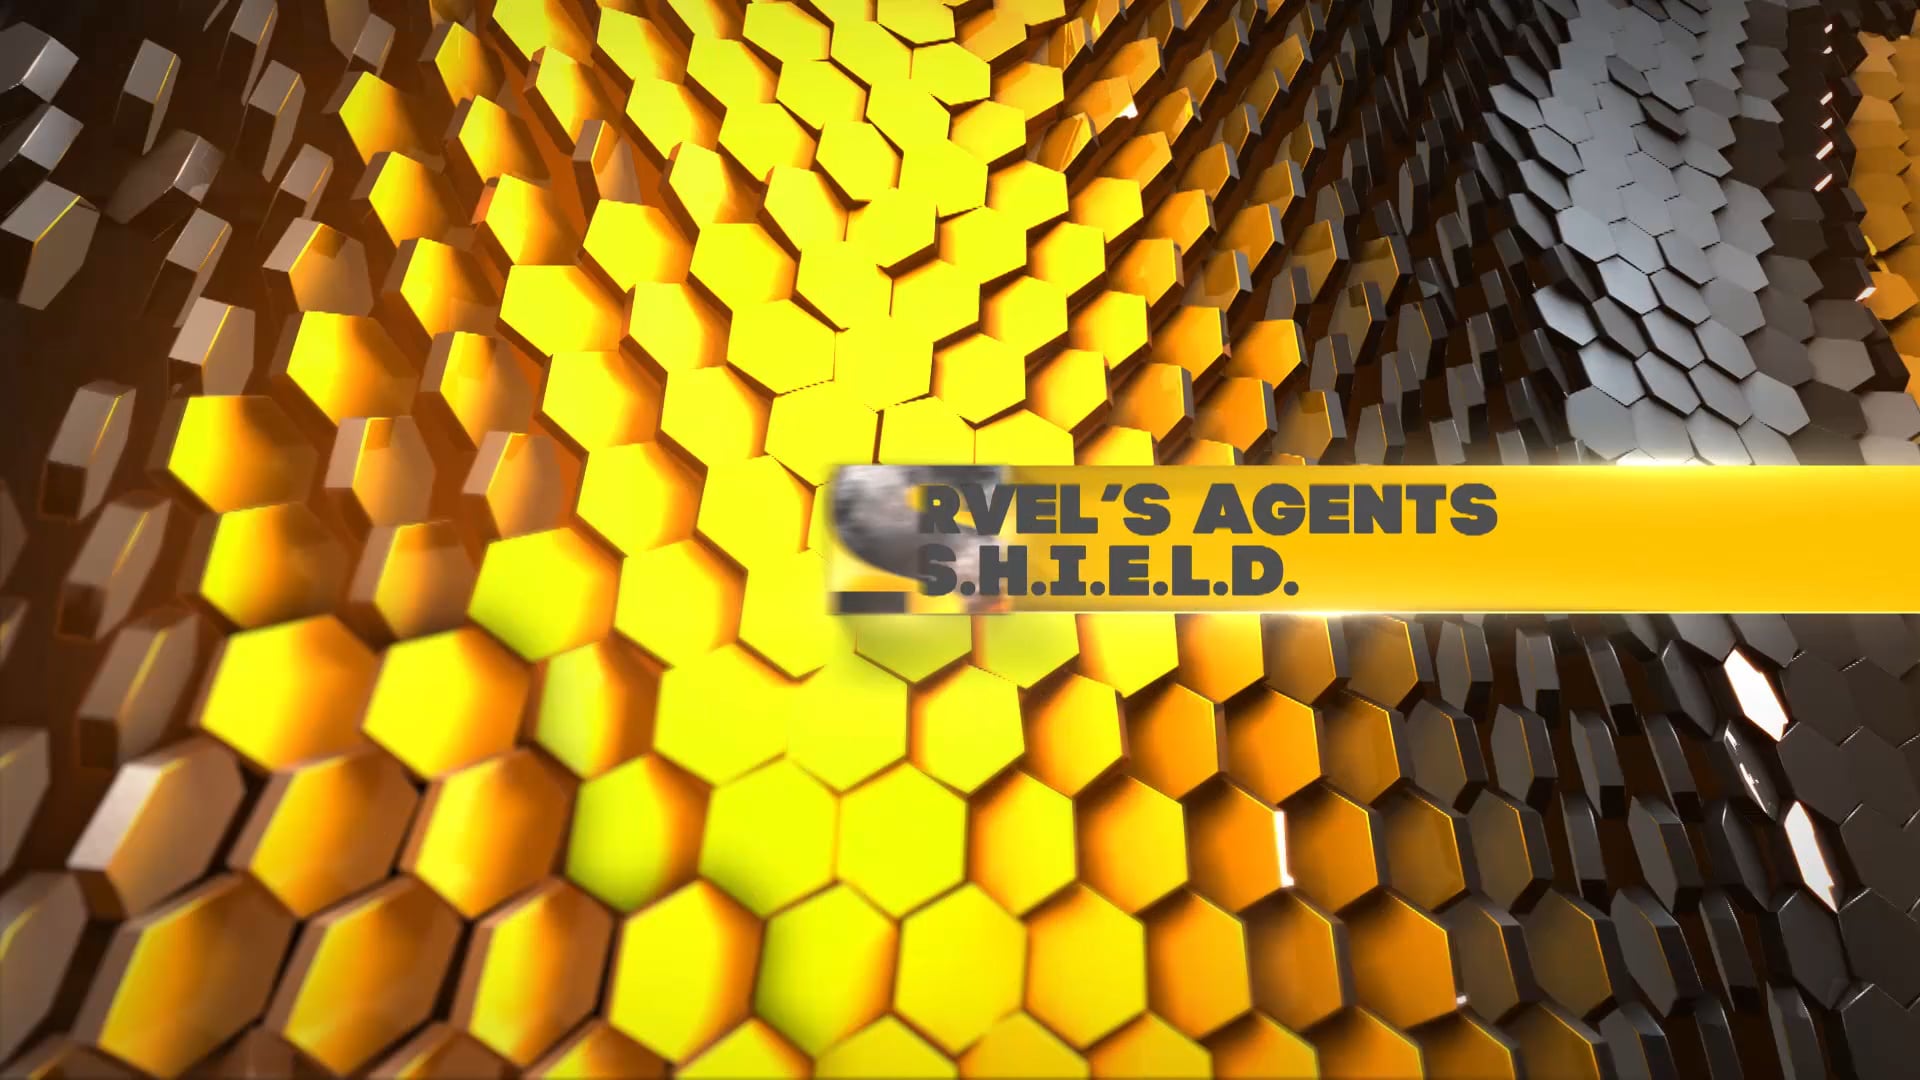 SONY – AGENTS OF SHIELD